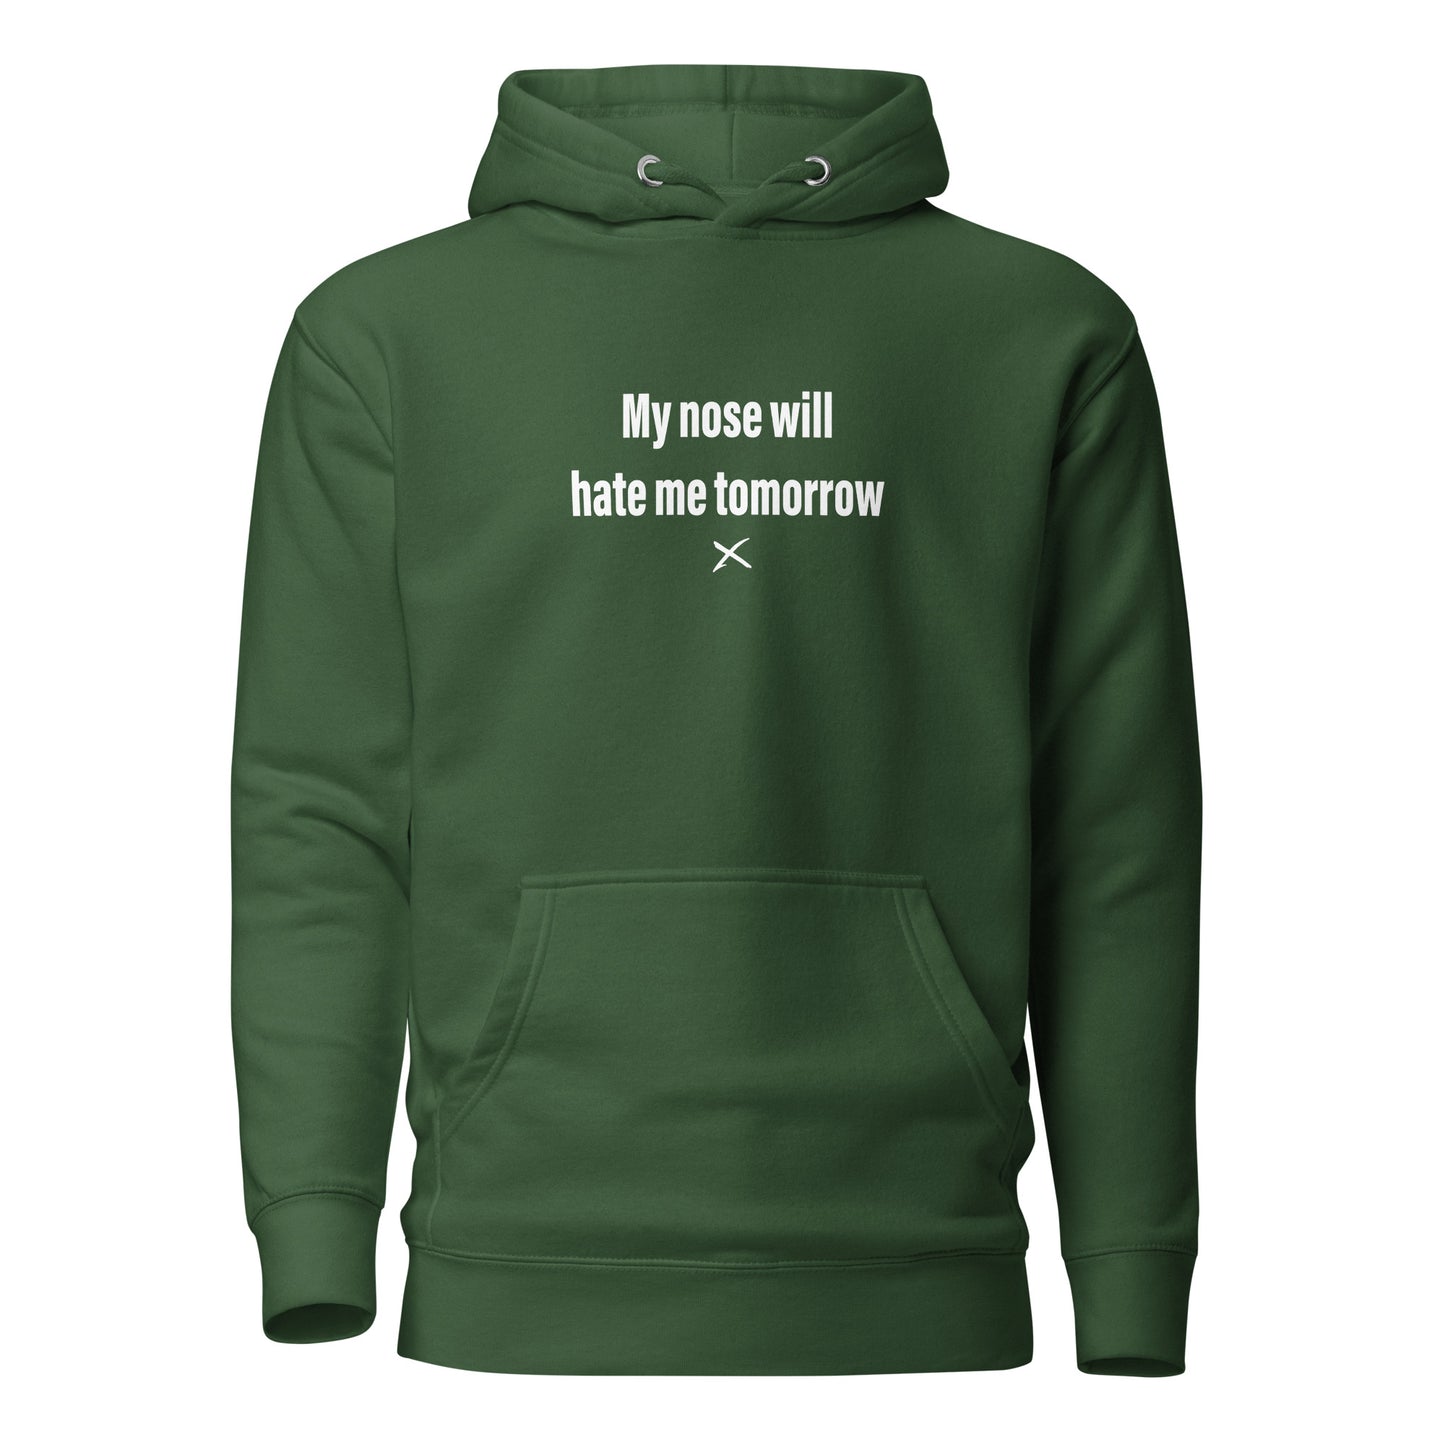 My nose will hate me tomorrow - Hoodie